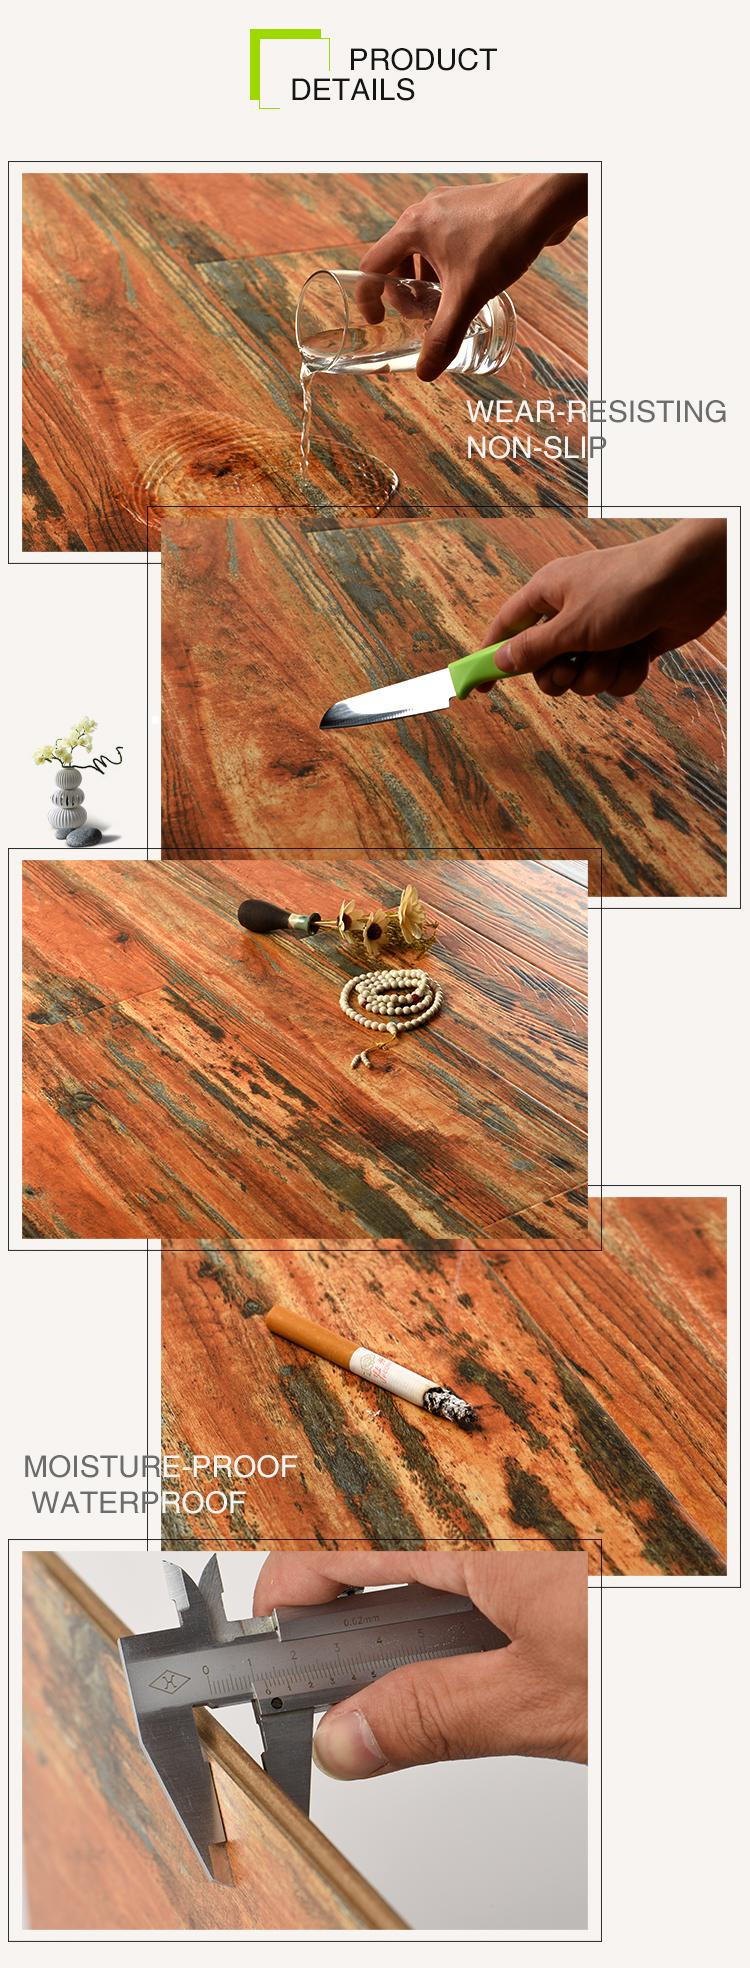 waterproof hardwood floor sealer of 1219mm 196mm all around sealing wax protection waterproof moisture with and i have i have link to buy flooring samples200200mm